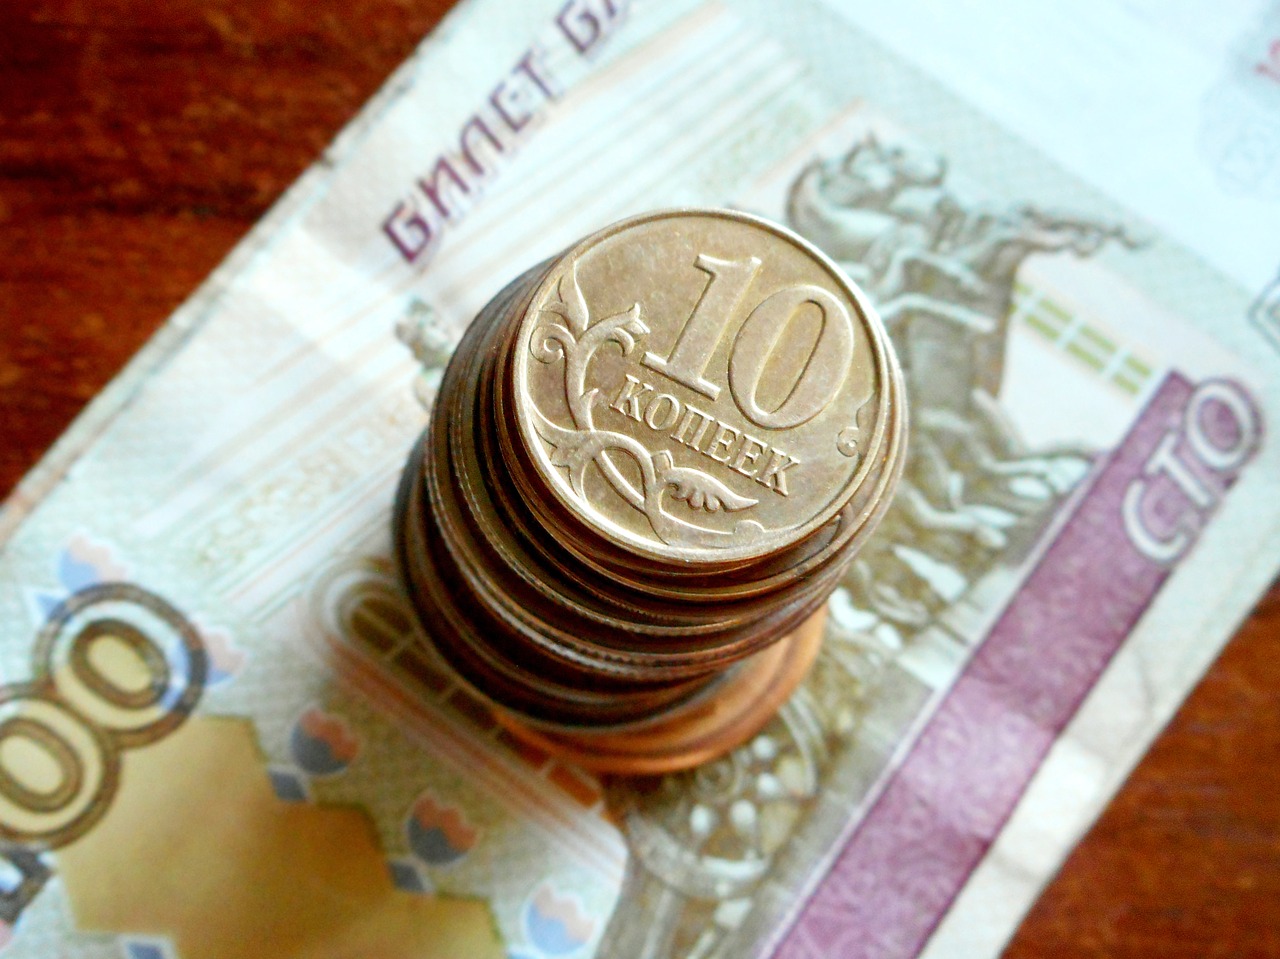 money currency coins free photo